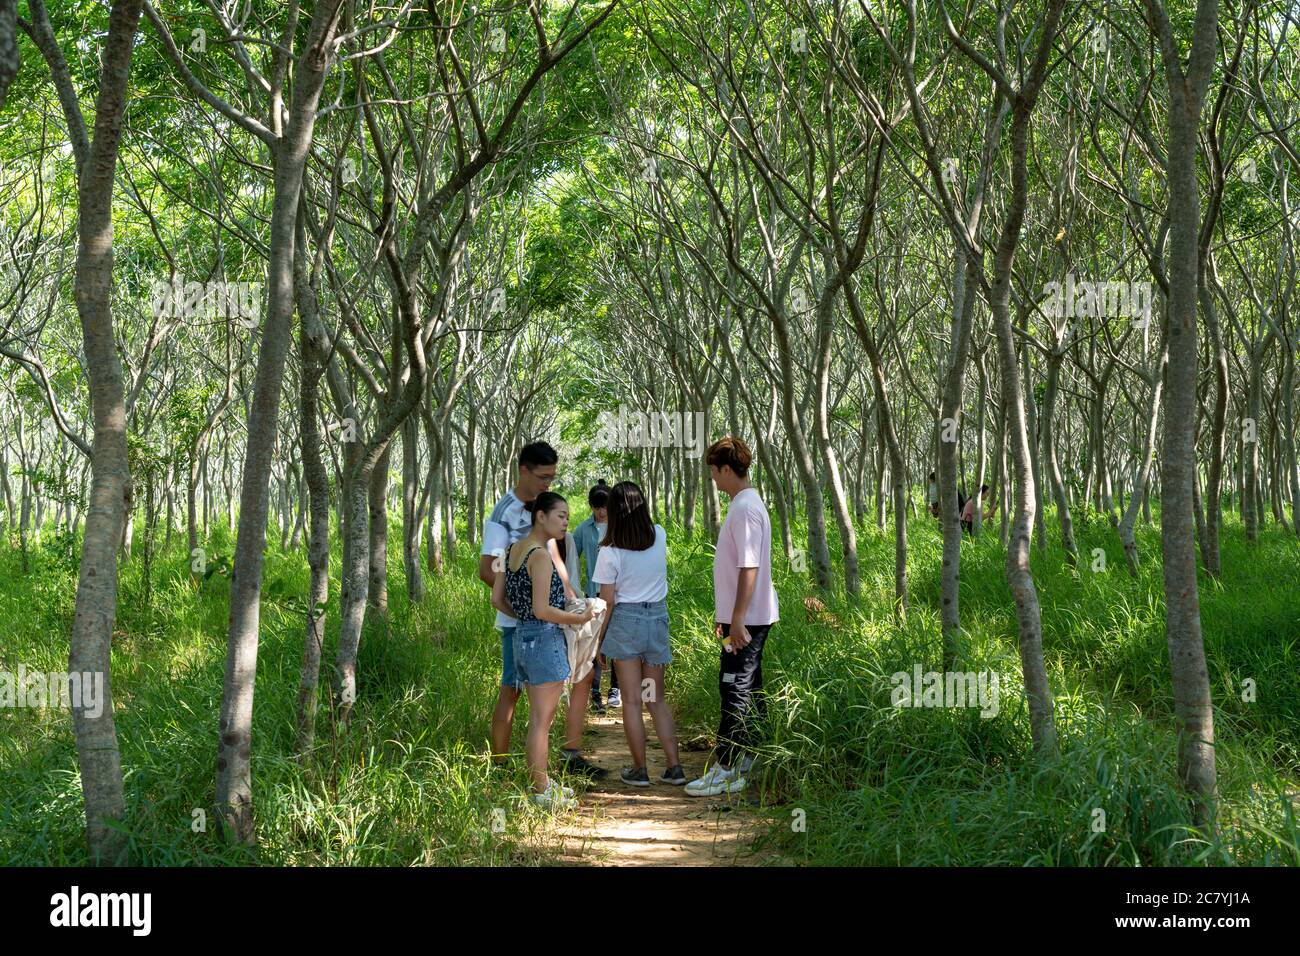 Sapindus forest, popular local photo spots in Taichung city Stock Photo